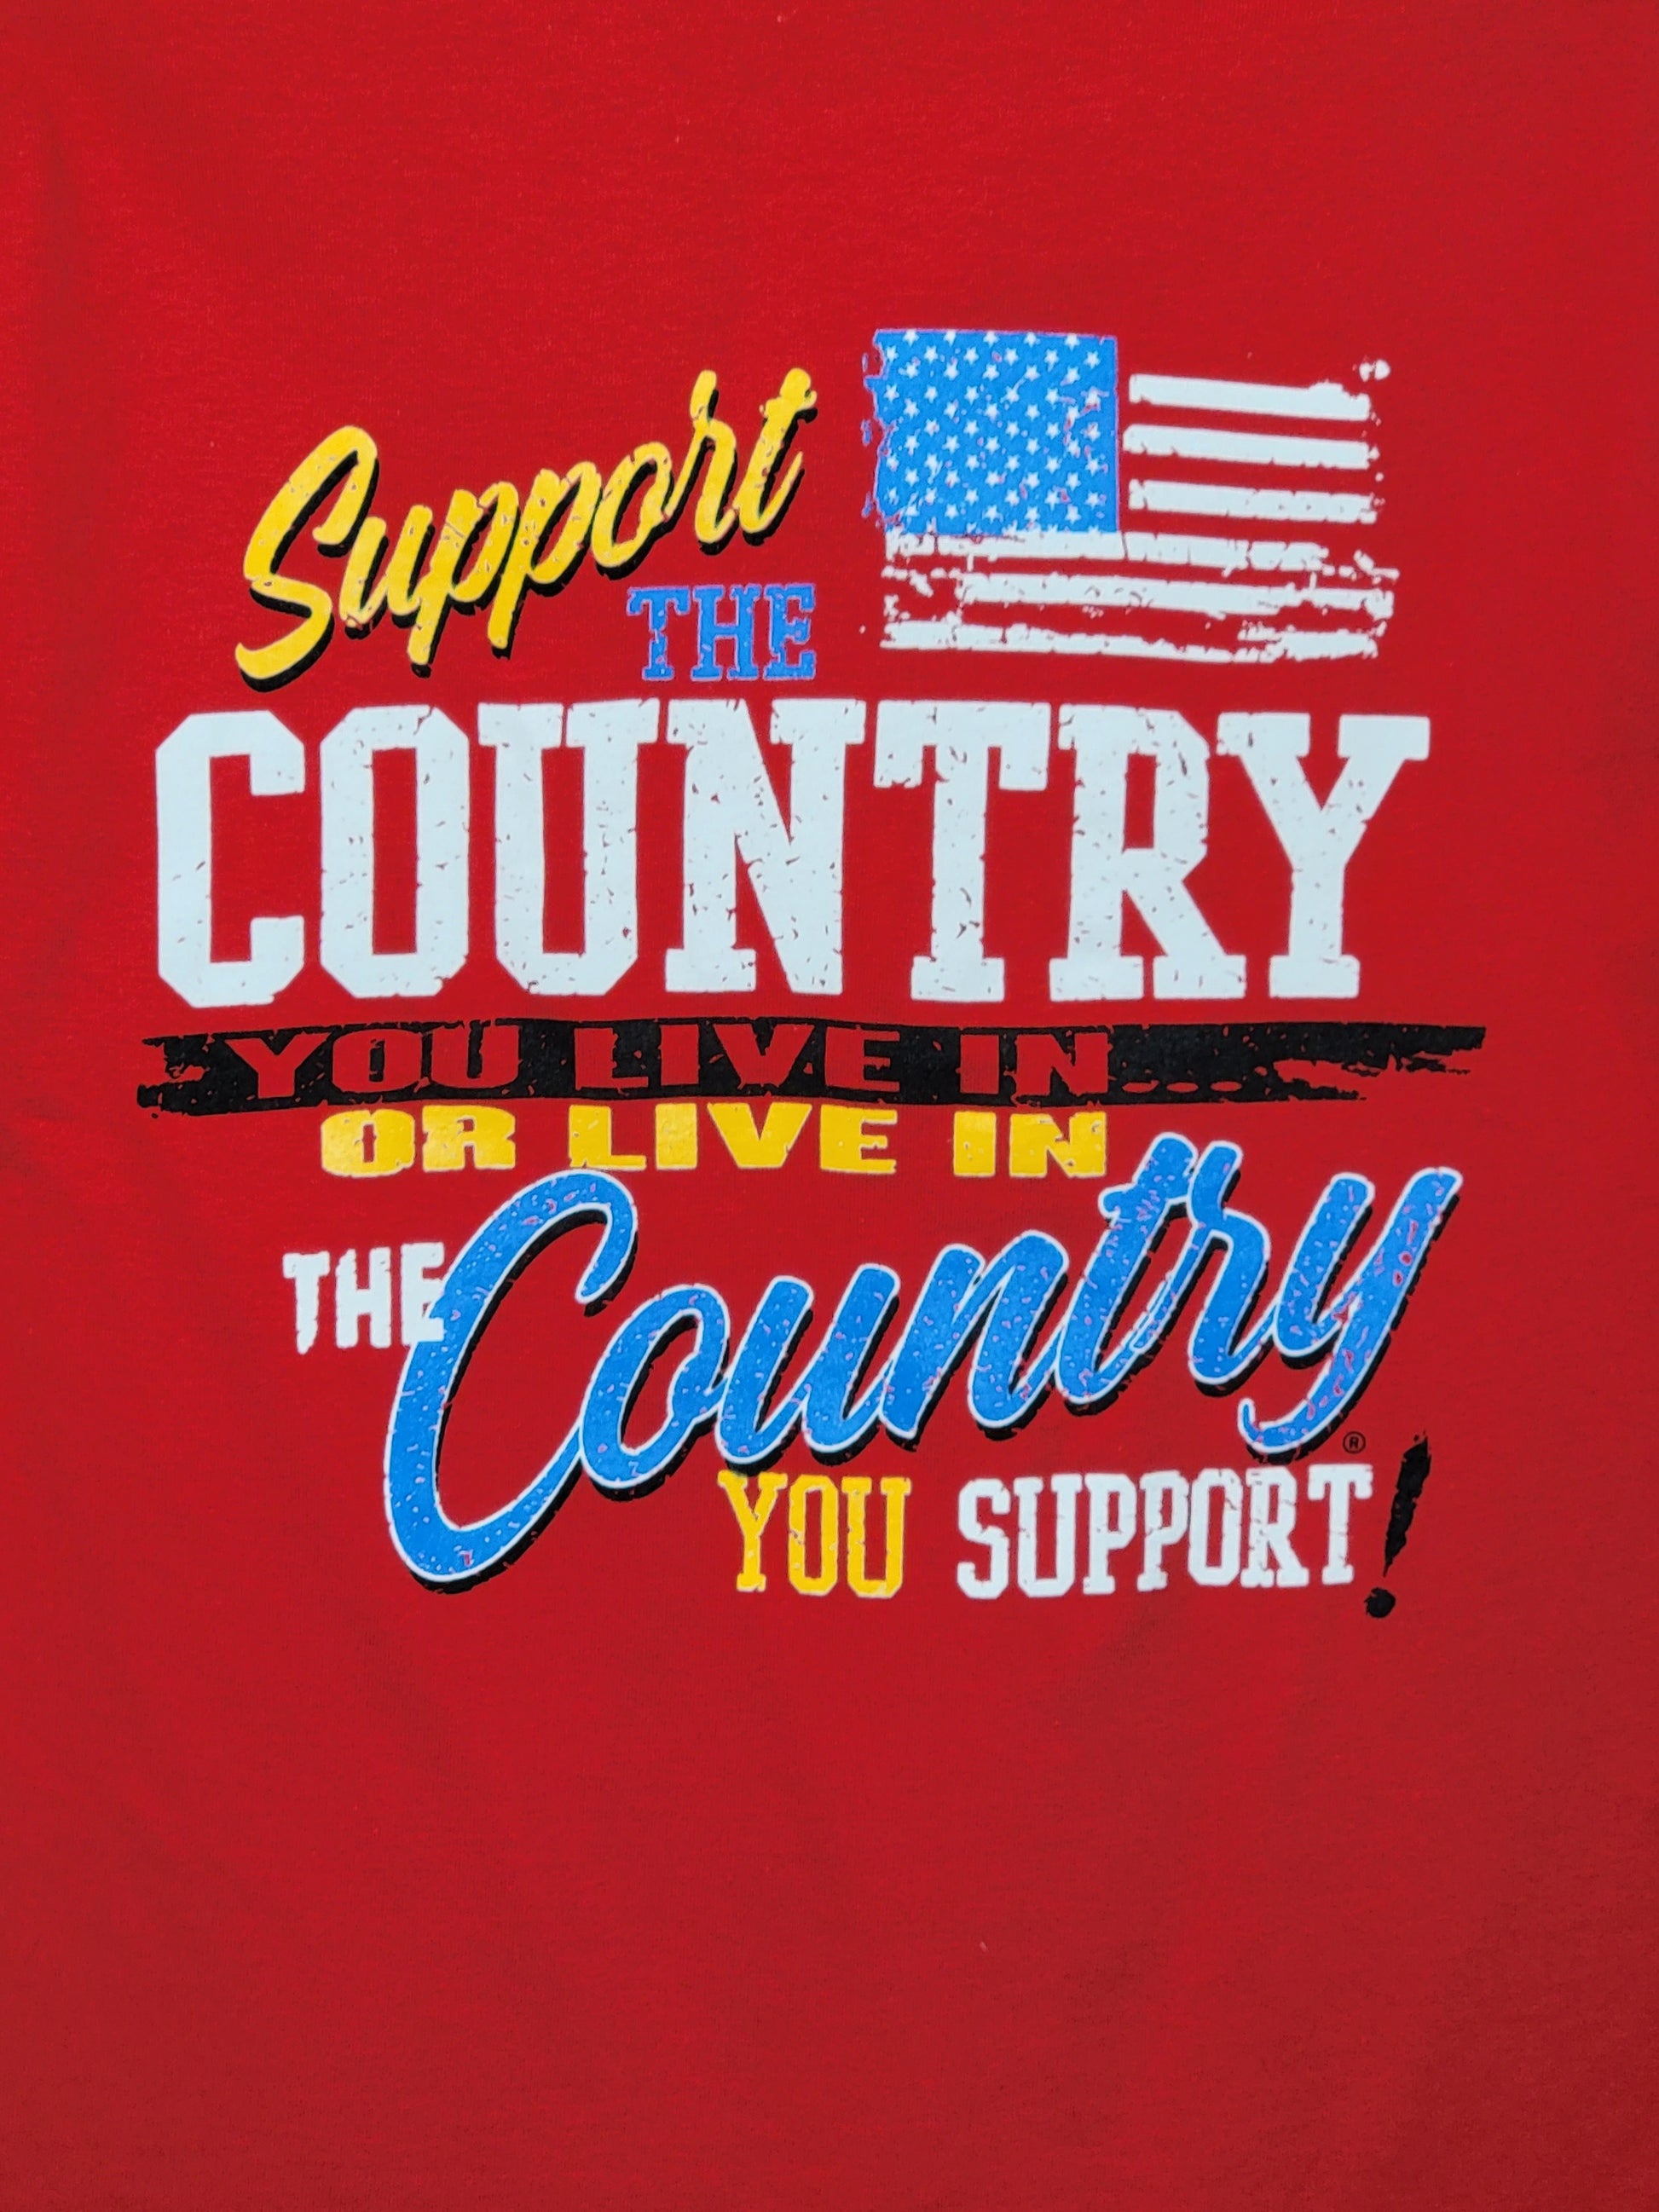 Support The Country You Live In or Live In The Country You Support